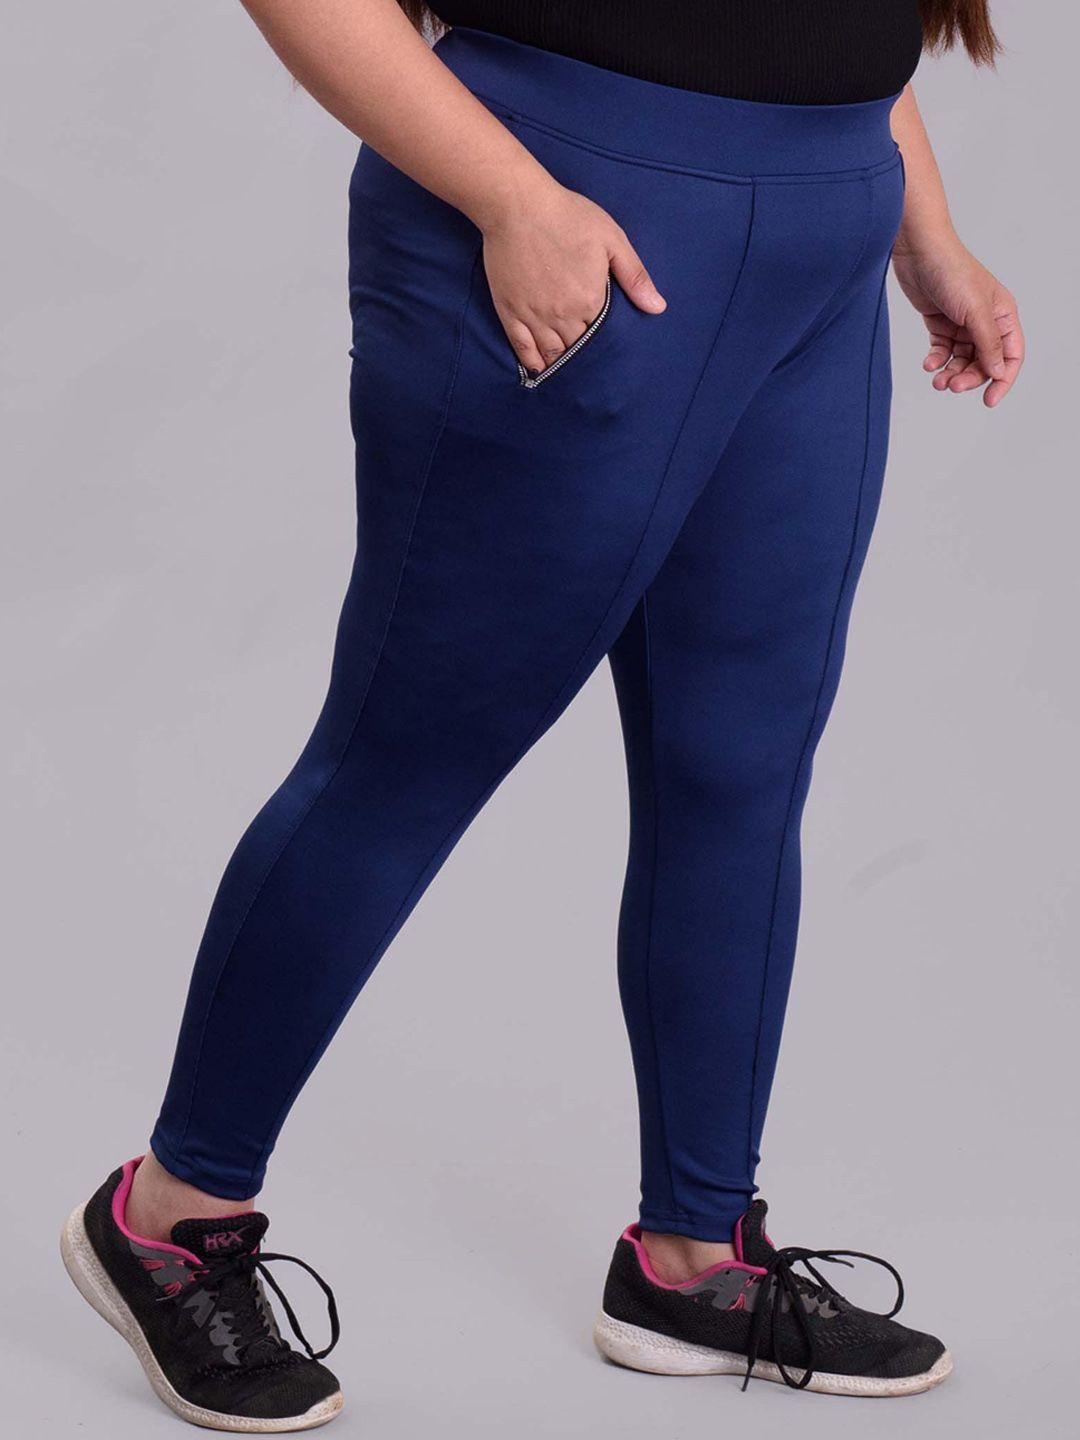 keepfit plus size antimicrobial sports tights